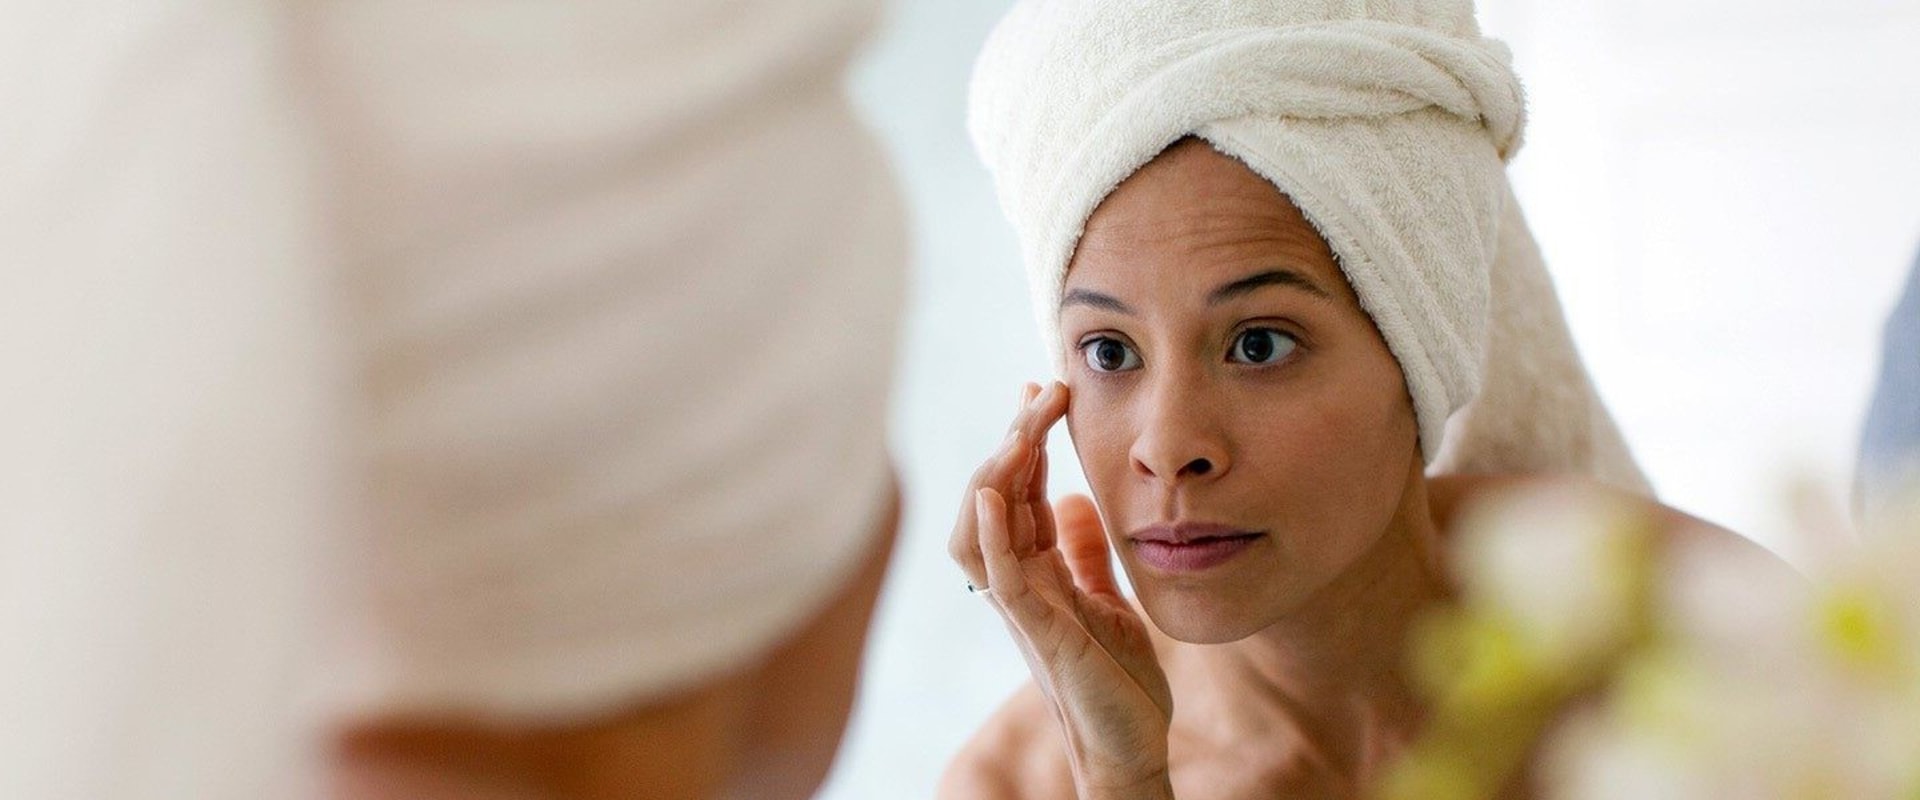 Are Skin Care Products Really Safe for Your Health?